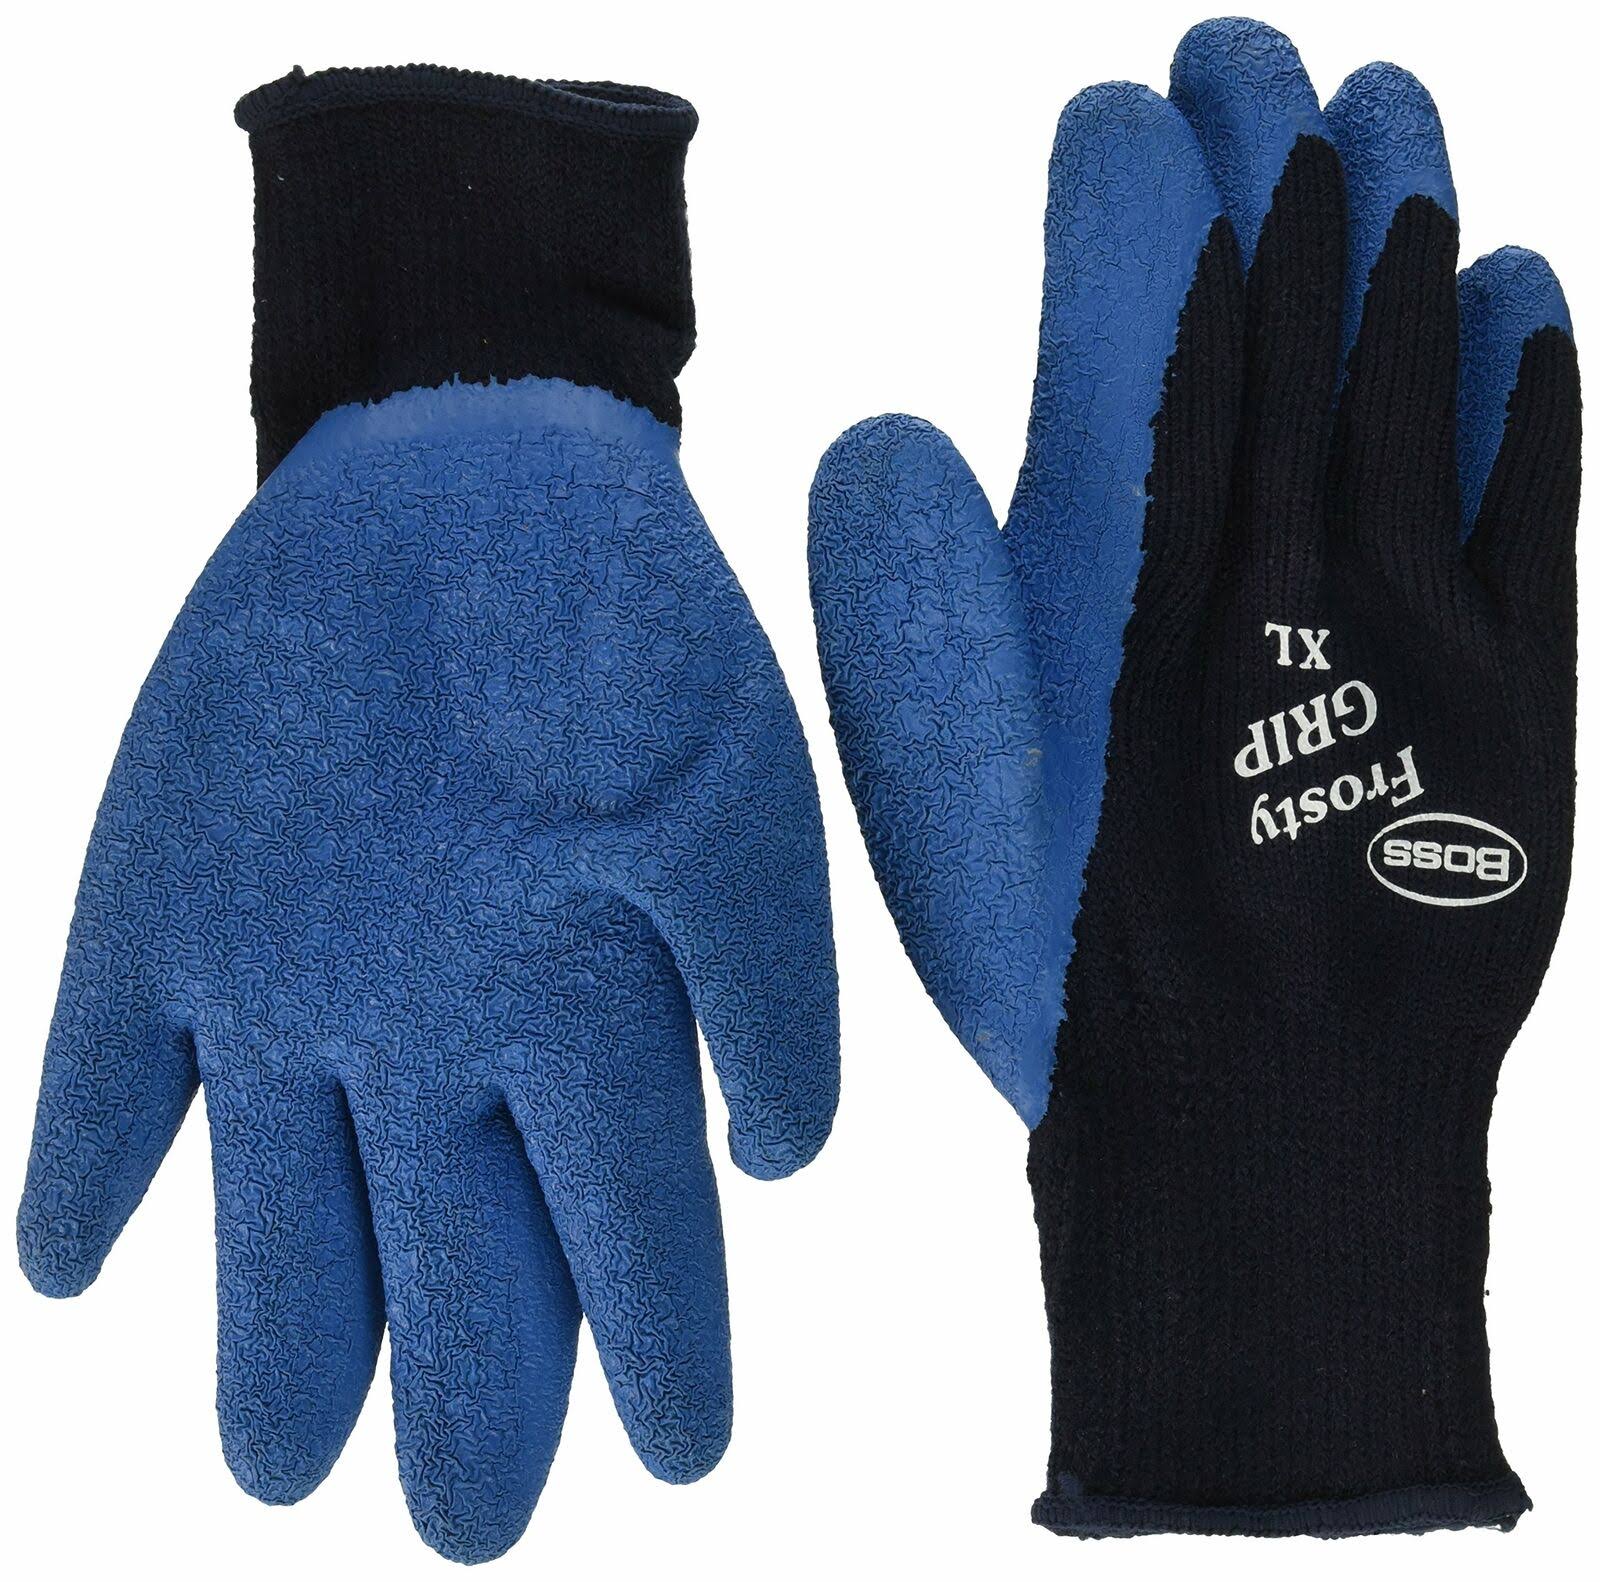 Boss Frosty Grip Insulated Rubber Gloves - Blue, X-Large